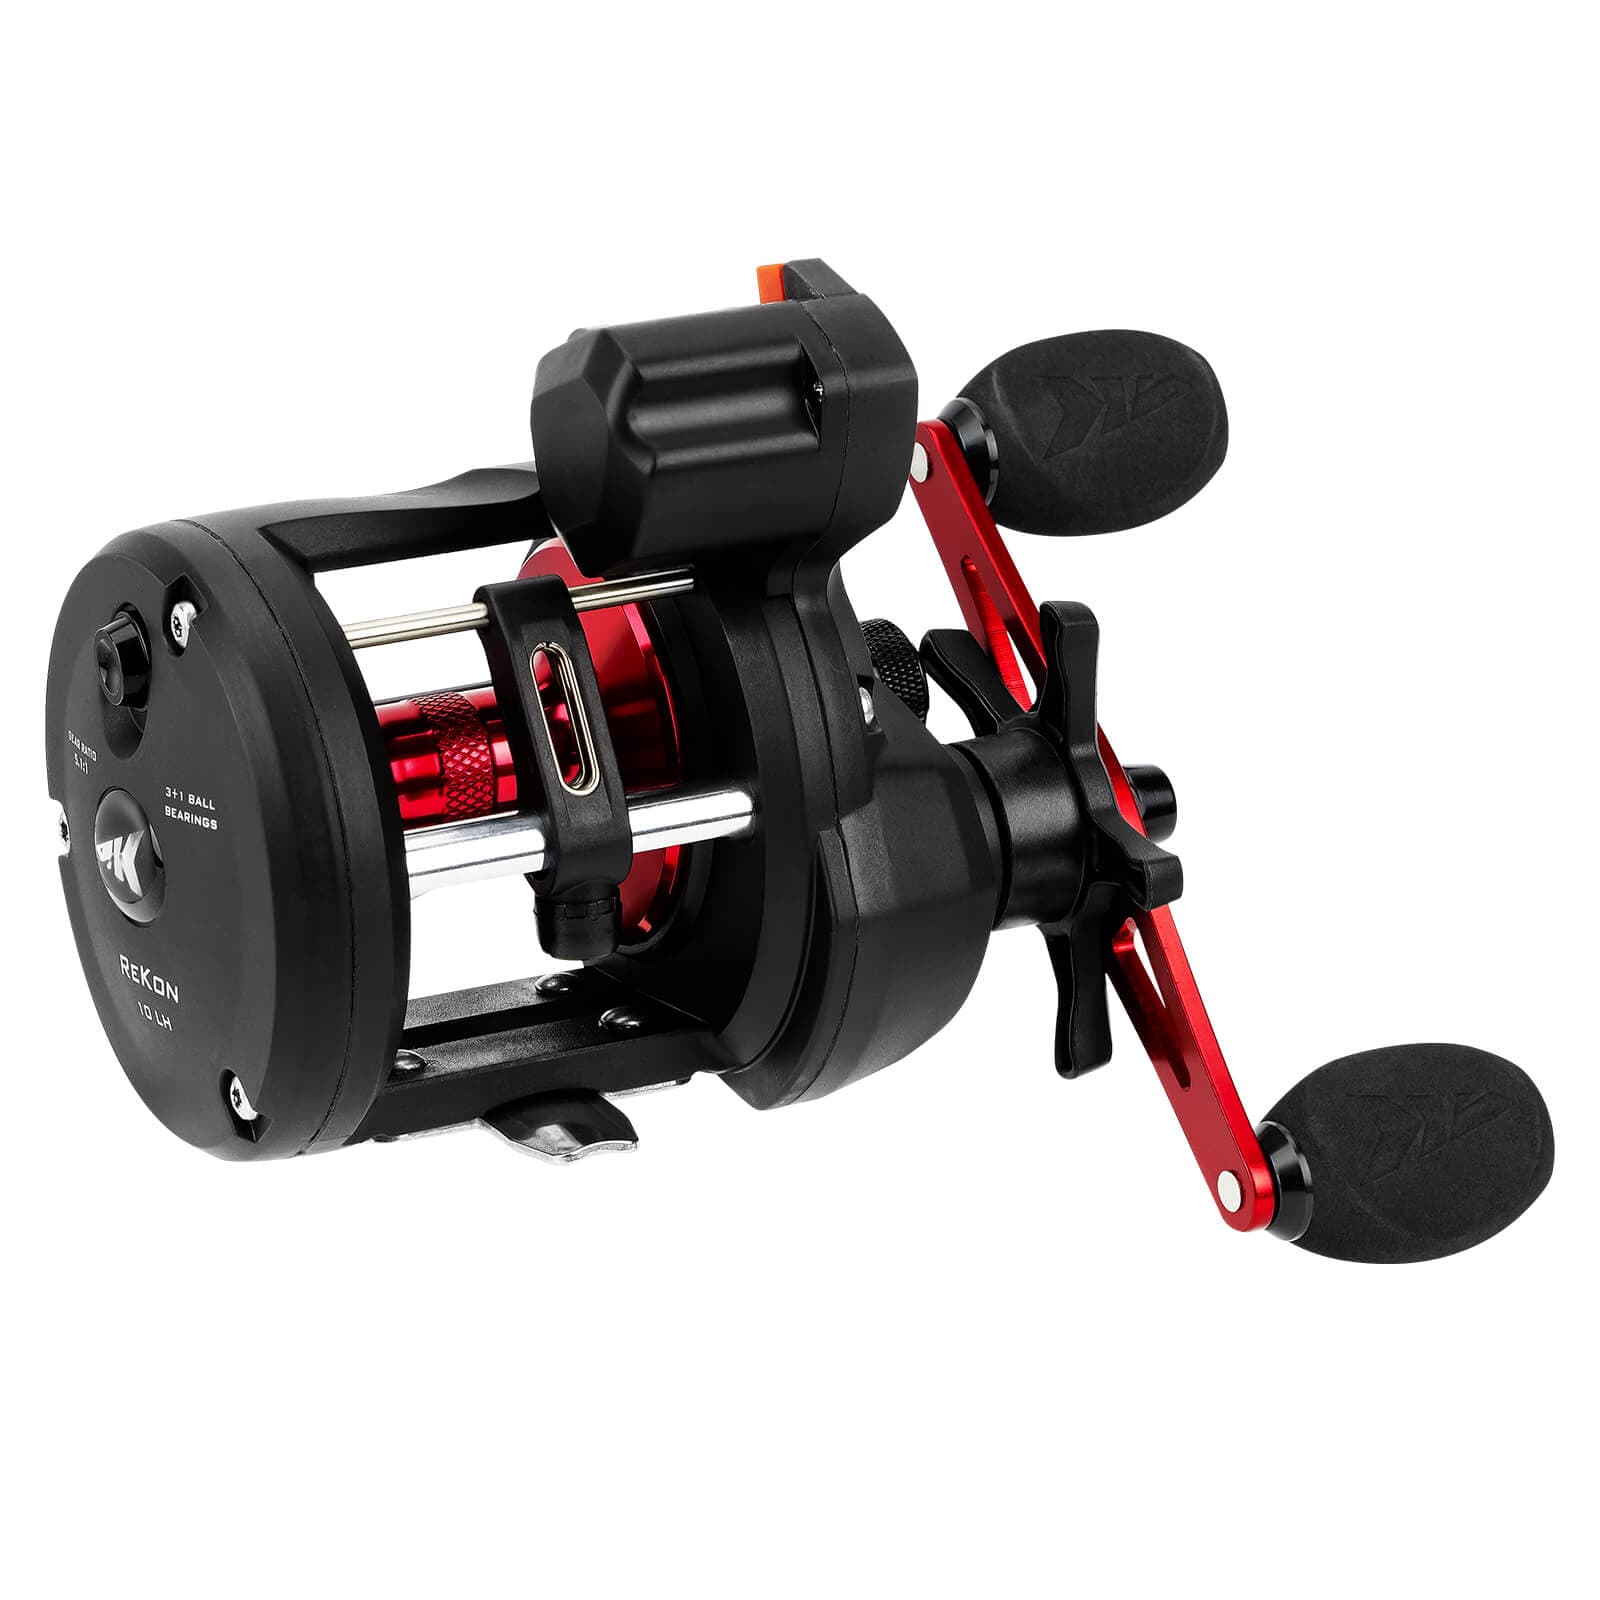  Fishing Reels - KastKing / Fishing Reels / Fishing Reels &  Accessories: Sports & Outdoors